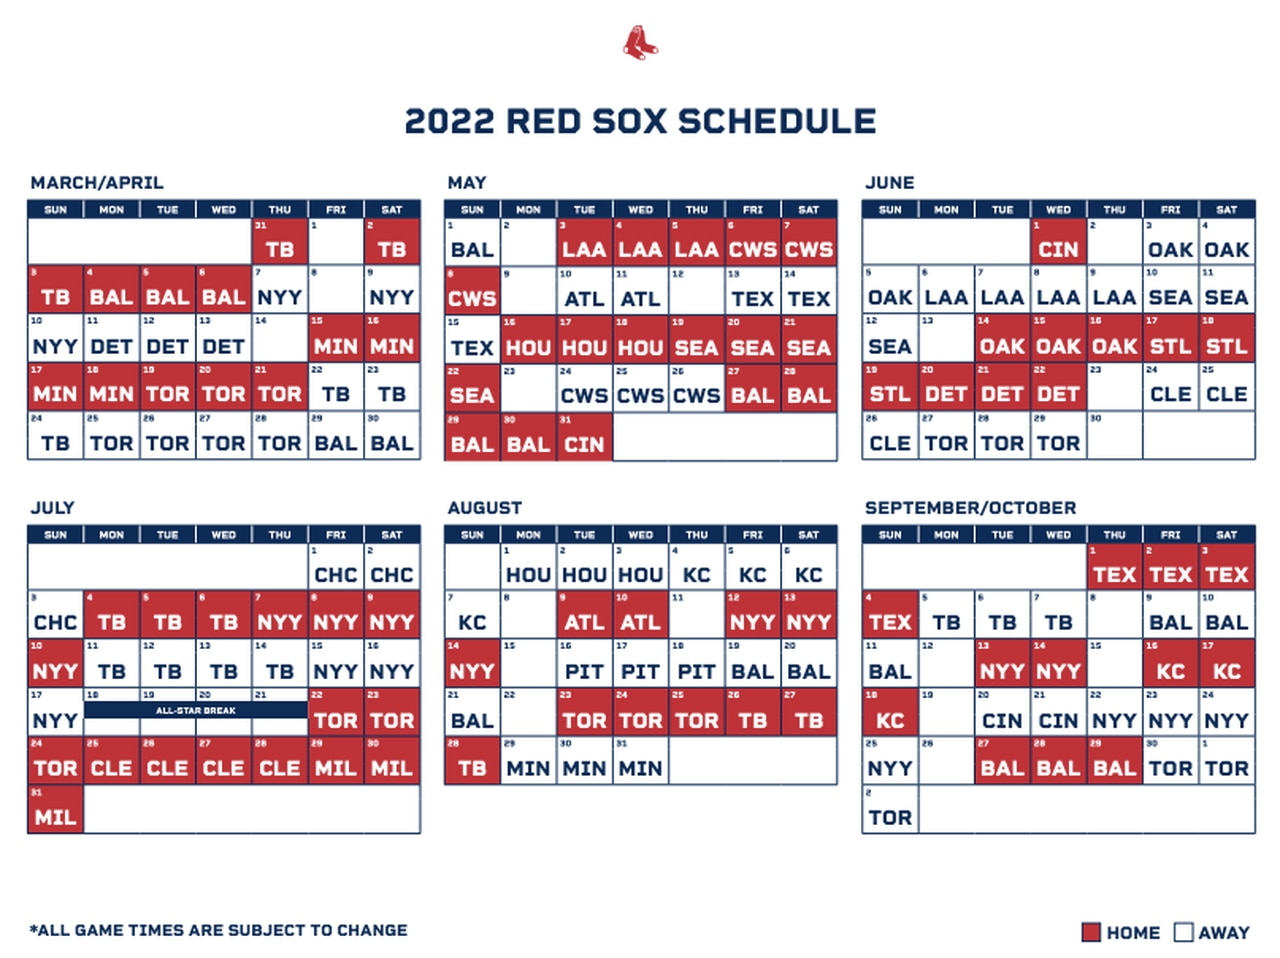 Boston Red Sox Printable Schedule